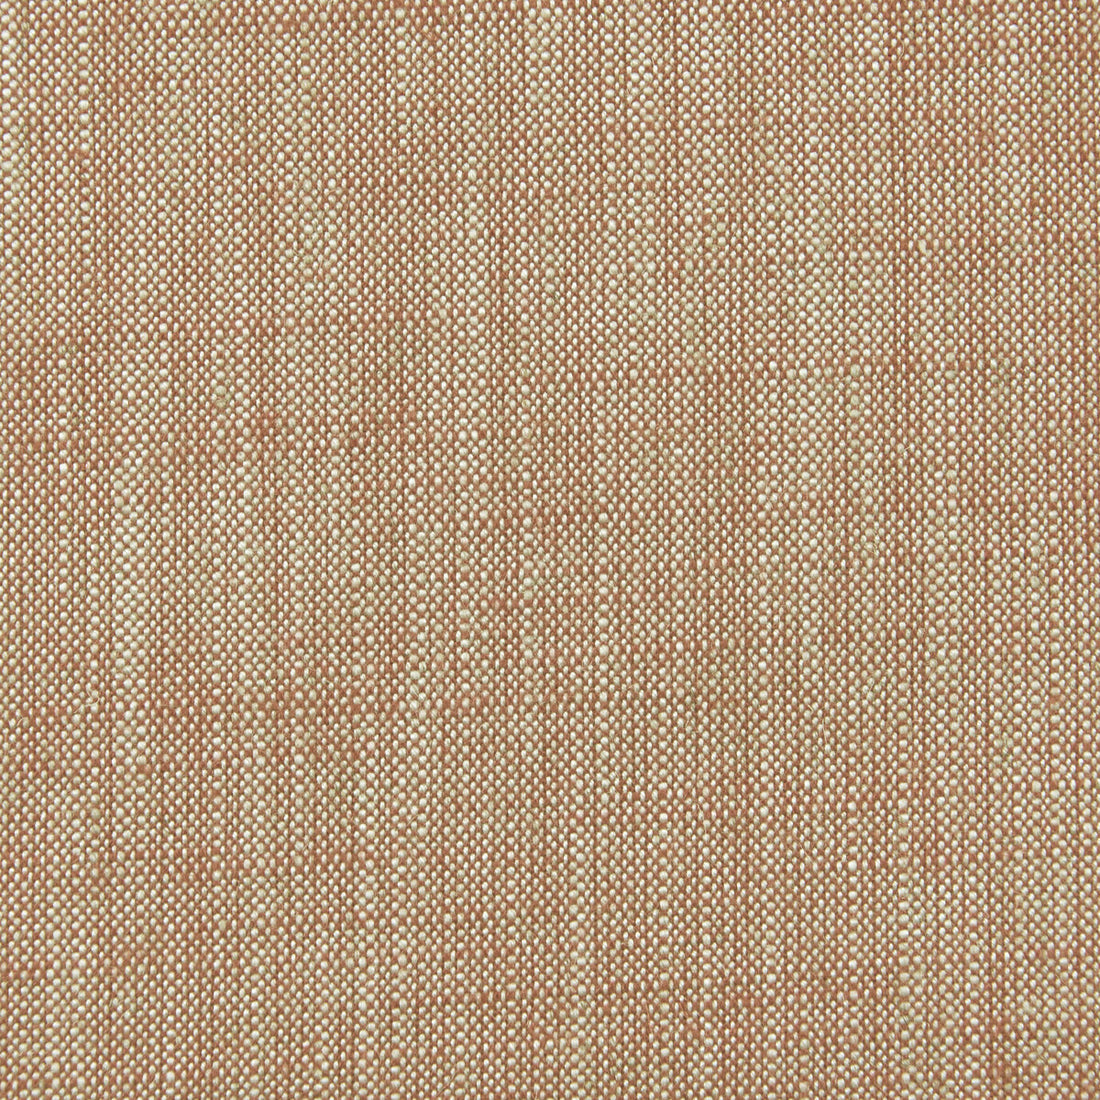 Biarritz fabric in cinnamon color - pattern F0965/10.CAC.0 - by Clarke And Clarke in the Clarke &amp; Clarke Biarritz collection